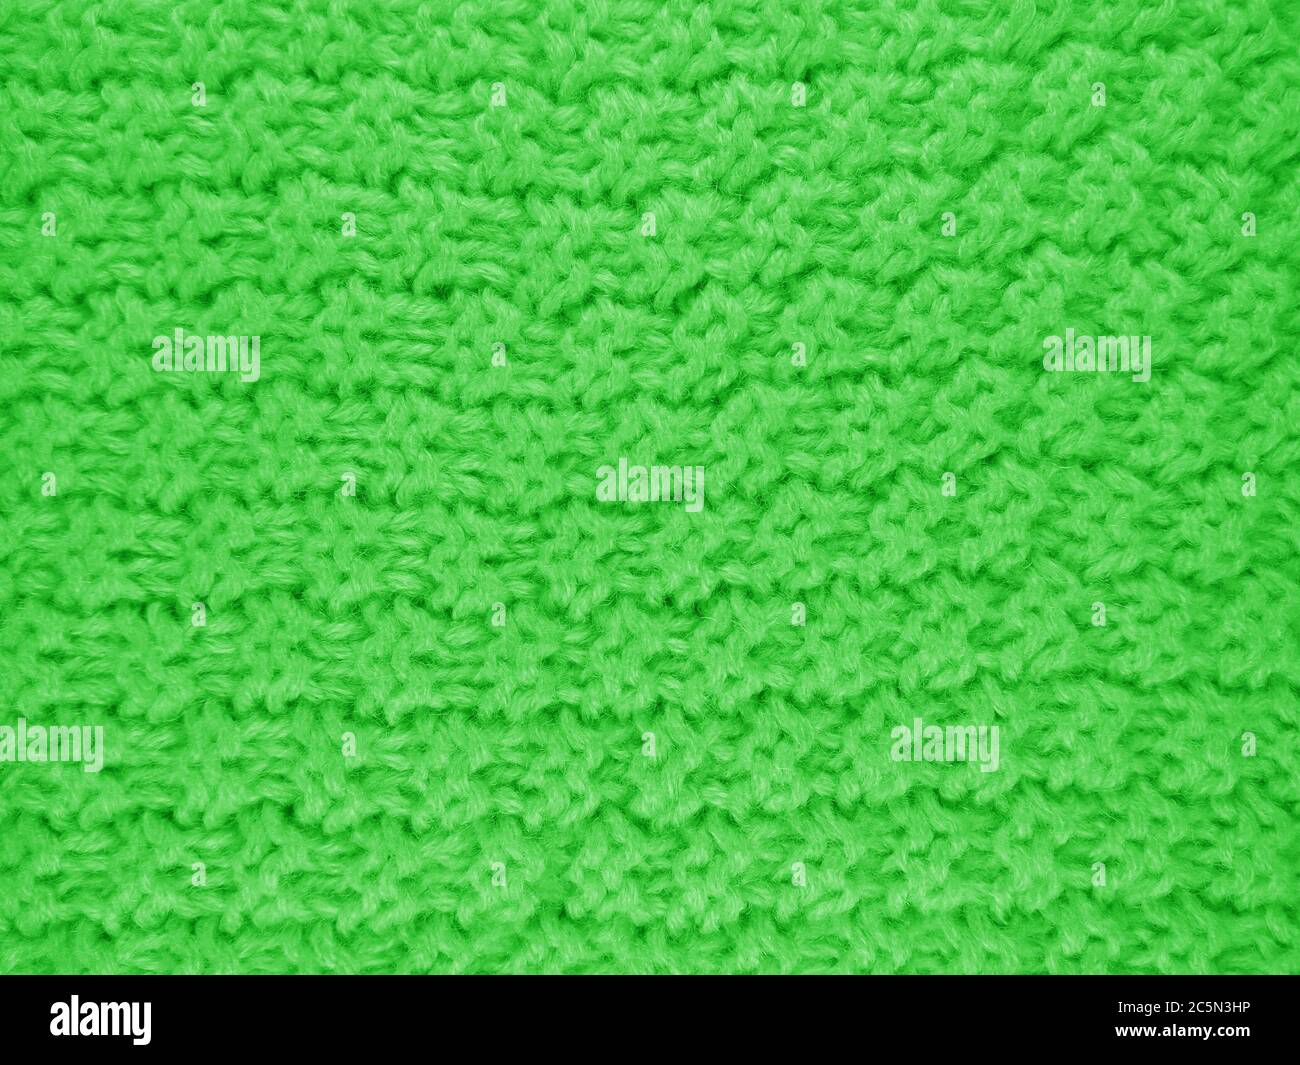 Green Wool Cloth while Knitting Stock Image - Image of wool, hobby: 34803765